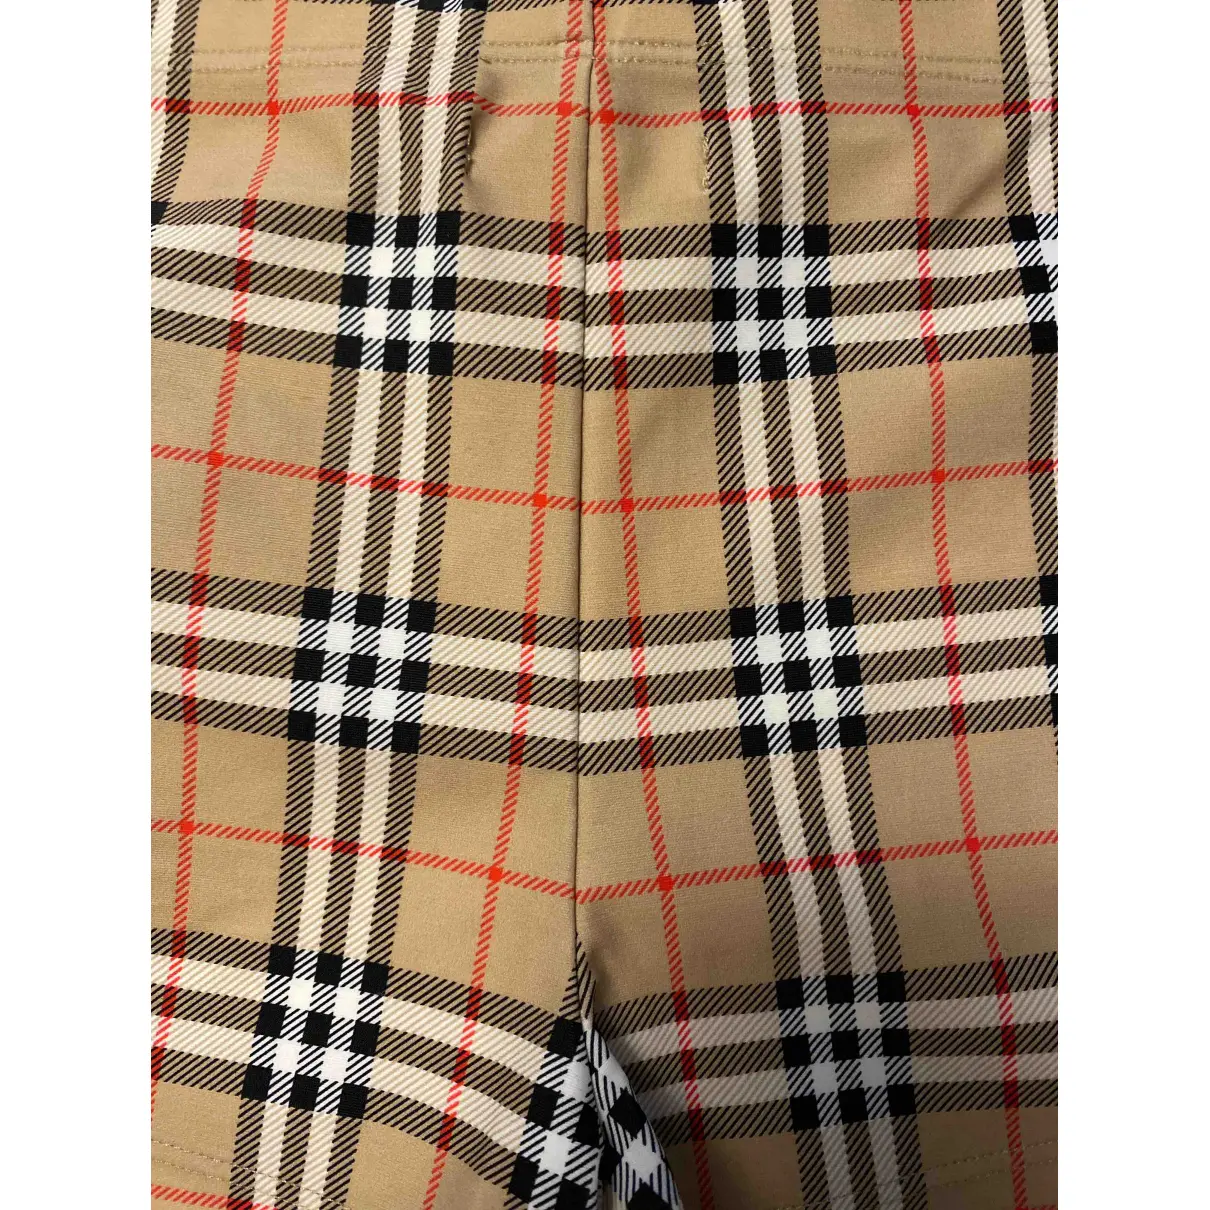 Buy Burberry Multicolour Polyester Shorts online